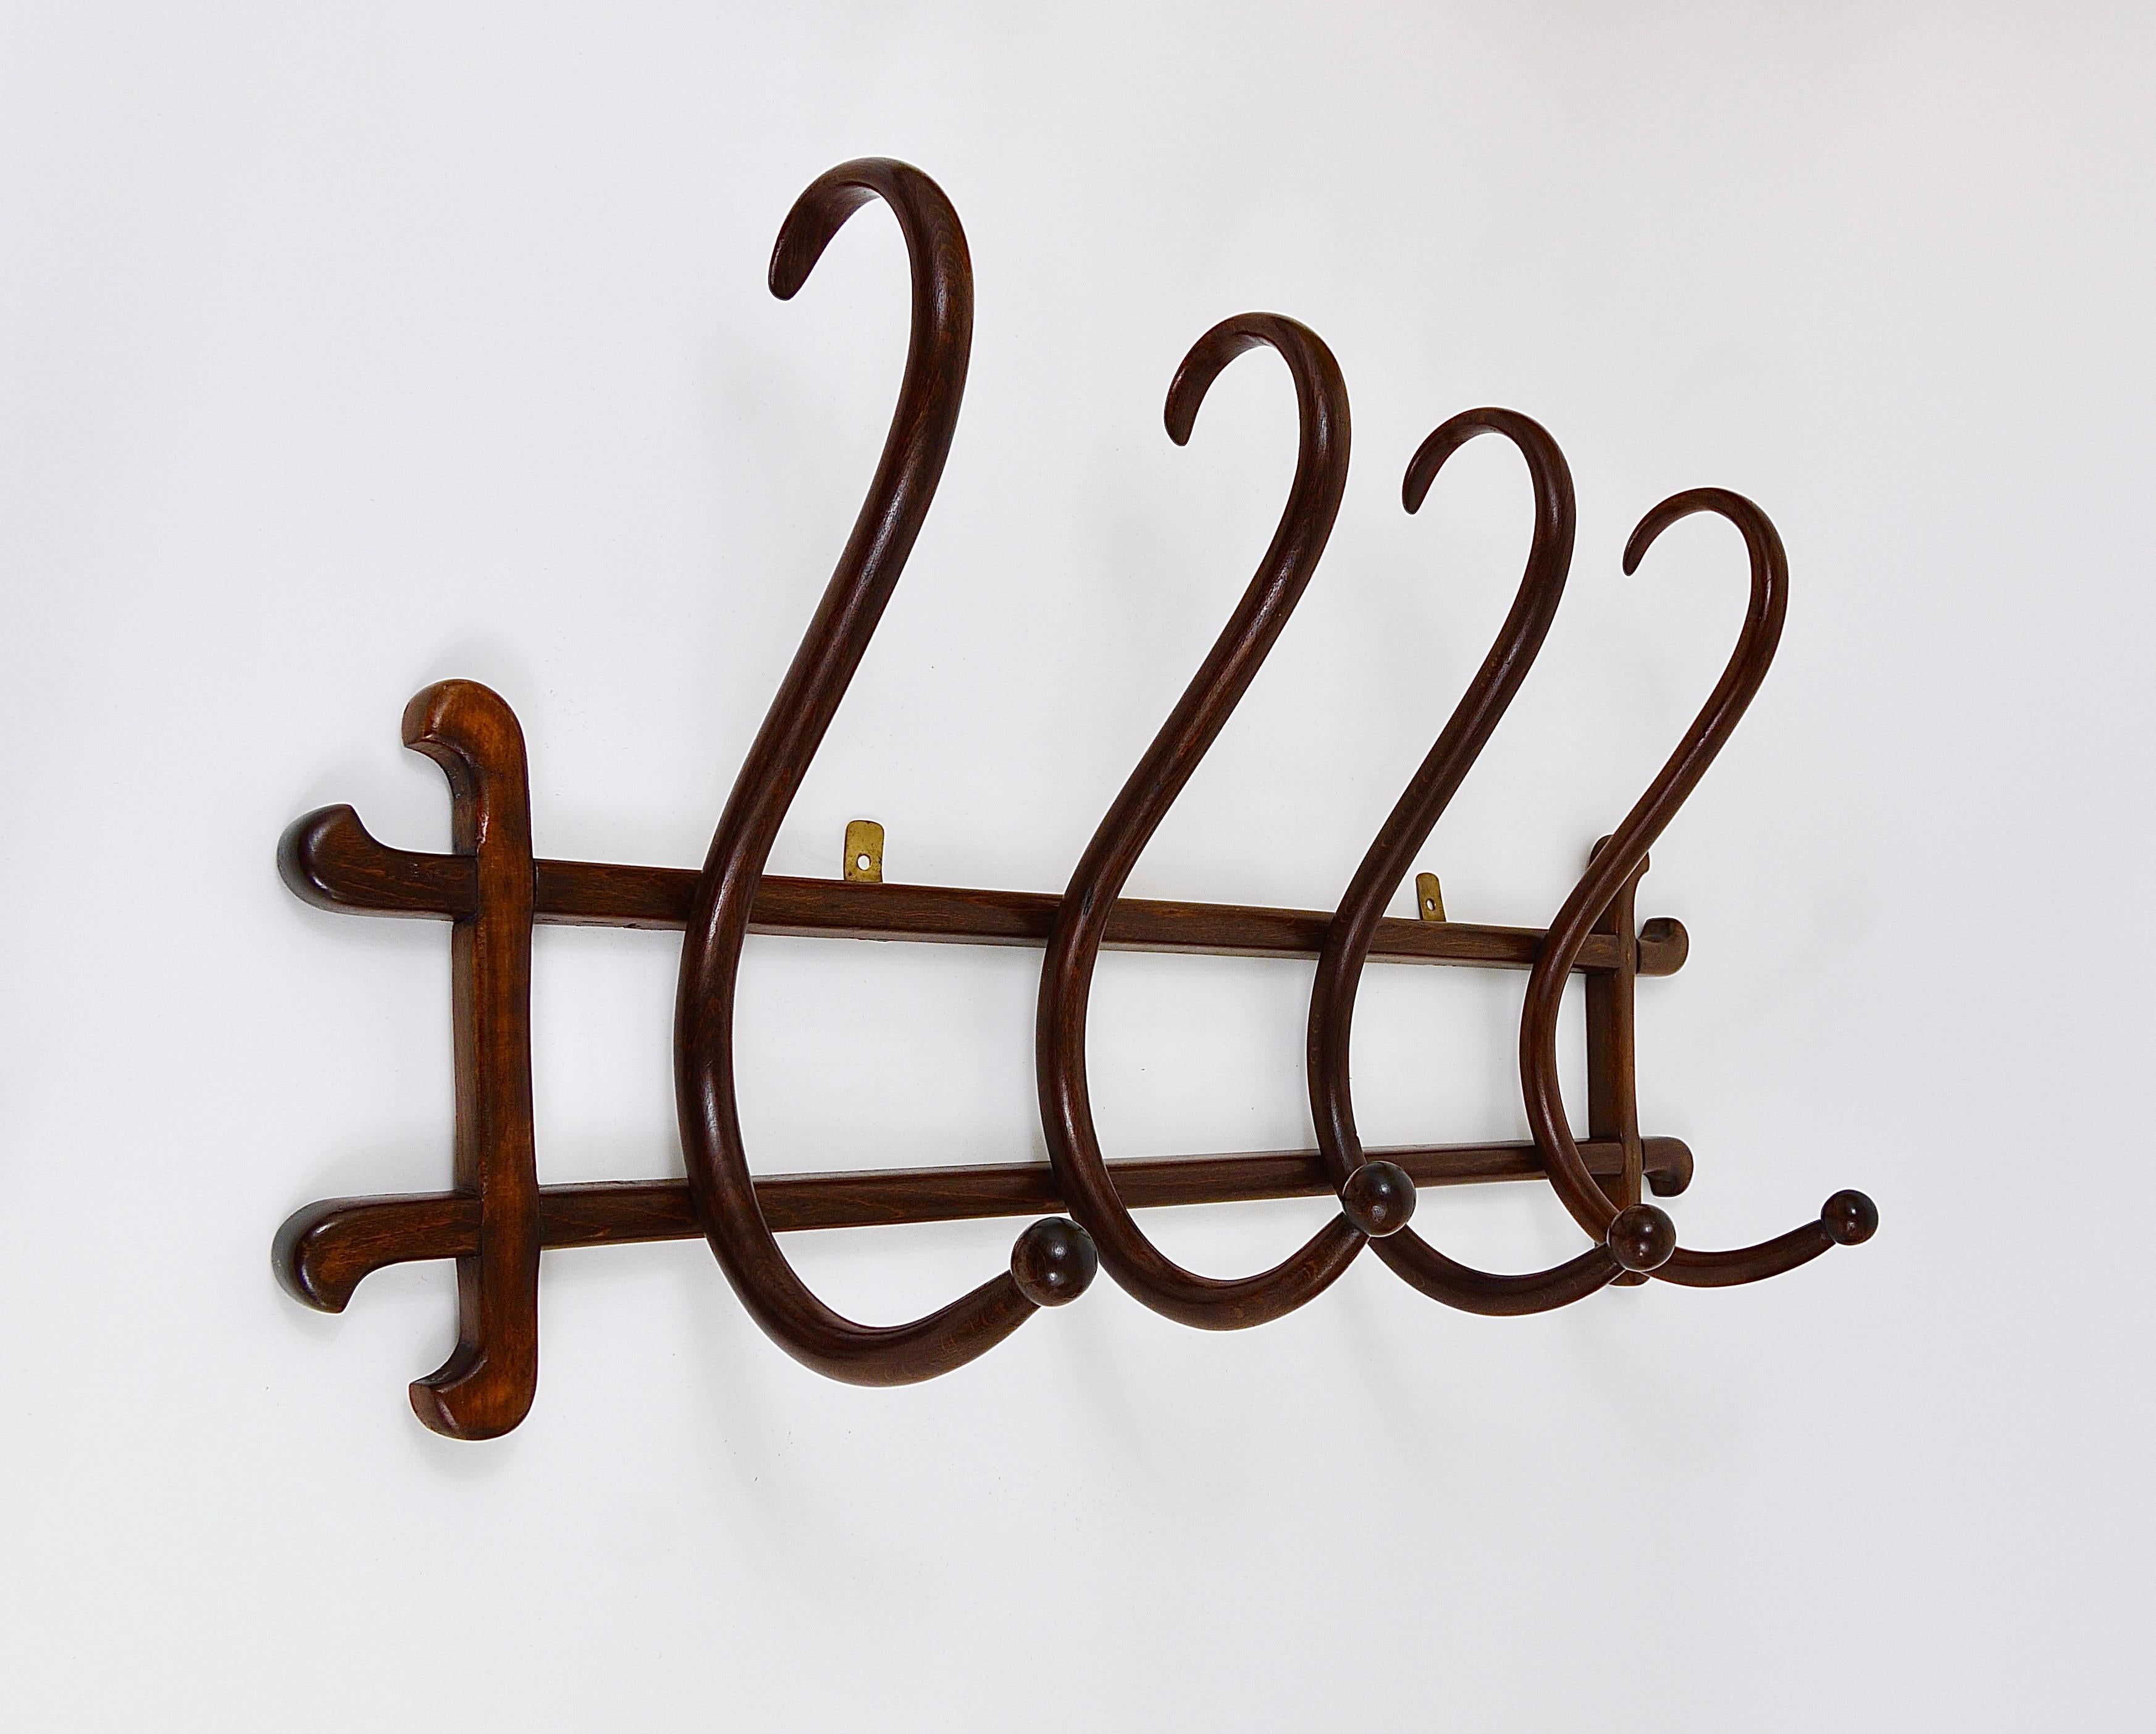 1900s Thonet Art Nouveau Secession Bentwood Wall Coat Rack with four Hangers 2